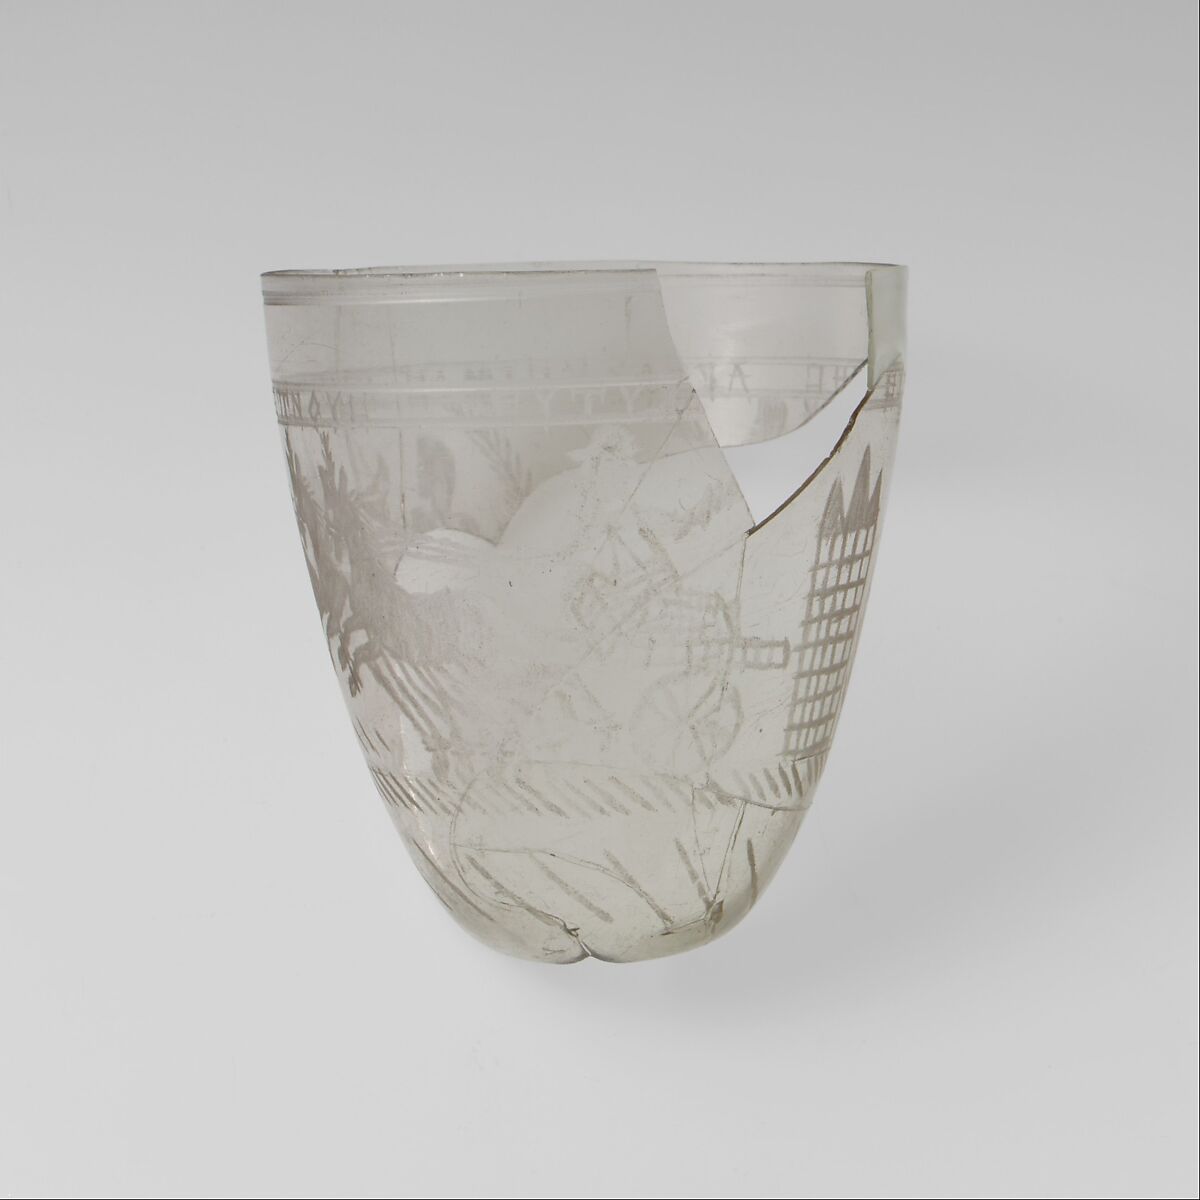 Glass beaker with victorious charioteer, Glass, Roman, Eastern Mediterranean 